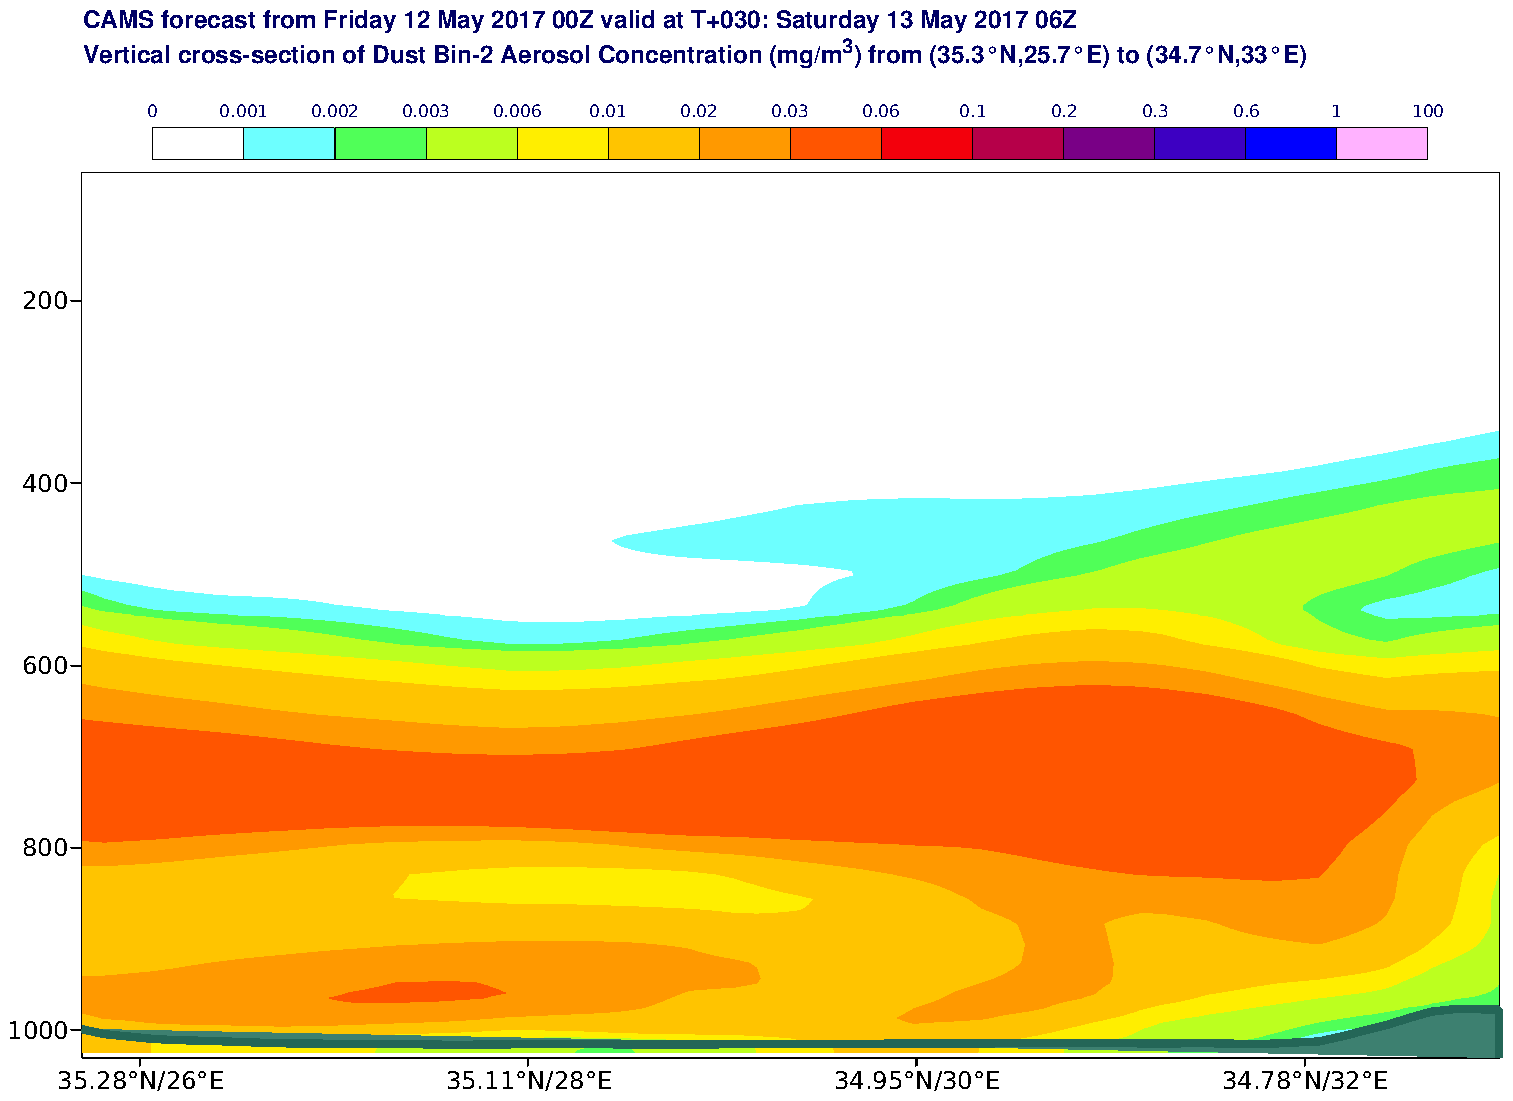 Vertical cross-section of Dust Bin-2 Aerosol Concentration (mg/m3) valid at T30 - 2017-05-13 06:00